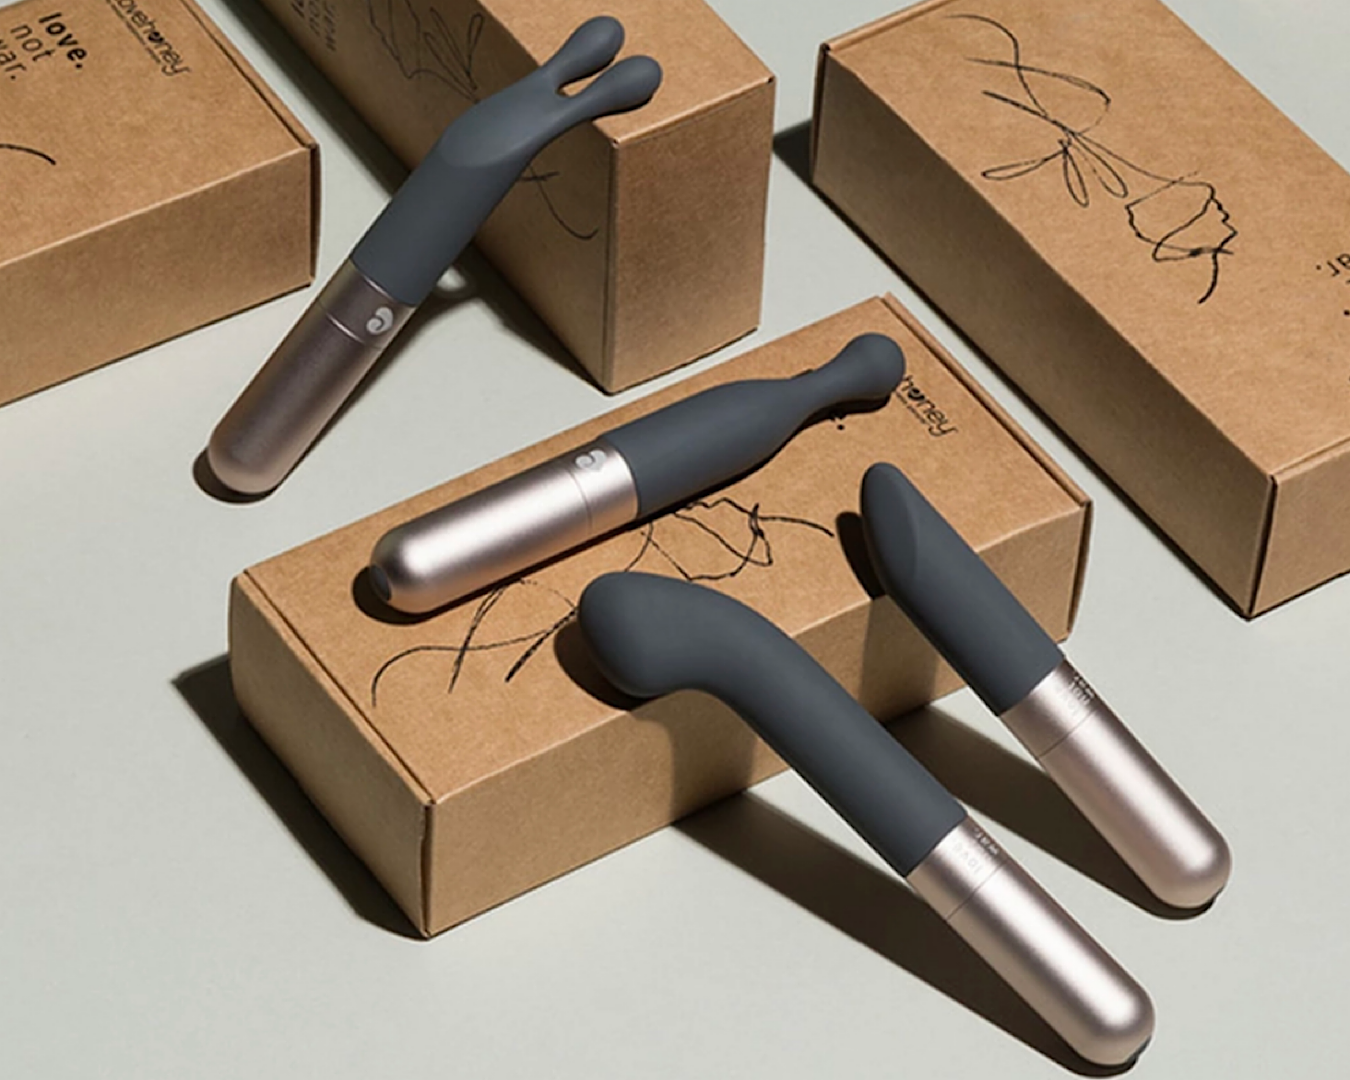 A bunch of different types of sleek silver vibrators scattered across brown box packaging. 